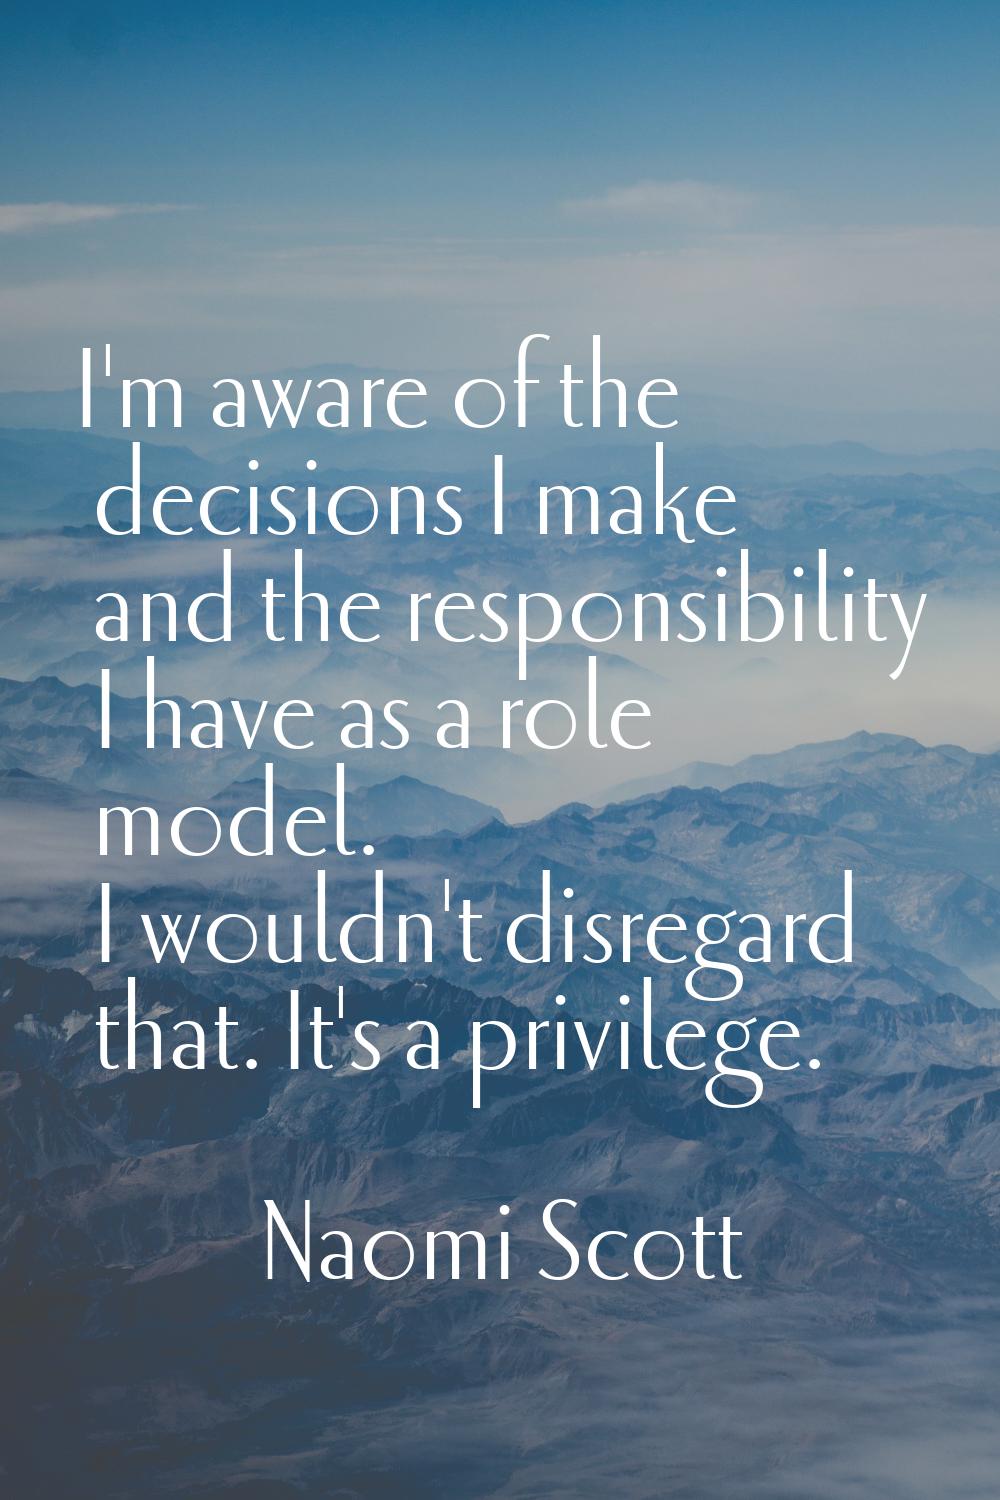 I'm aware of the decisions I make and the responsibility I have as a role model. I wouldn't disrega